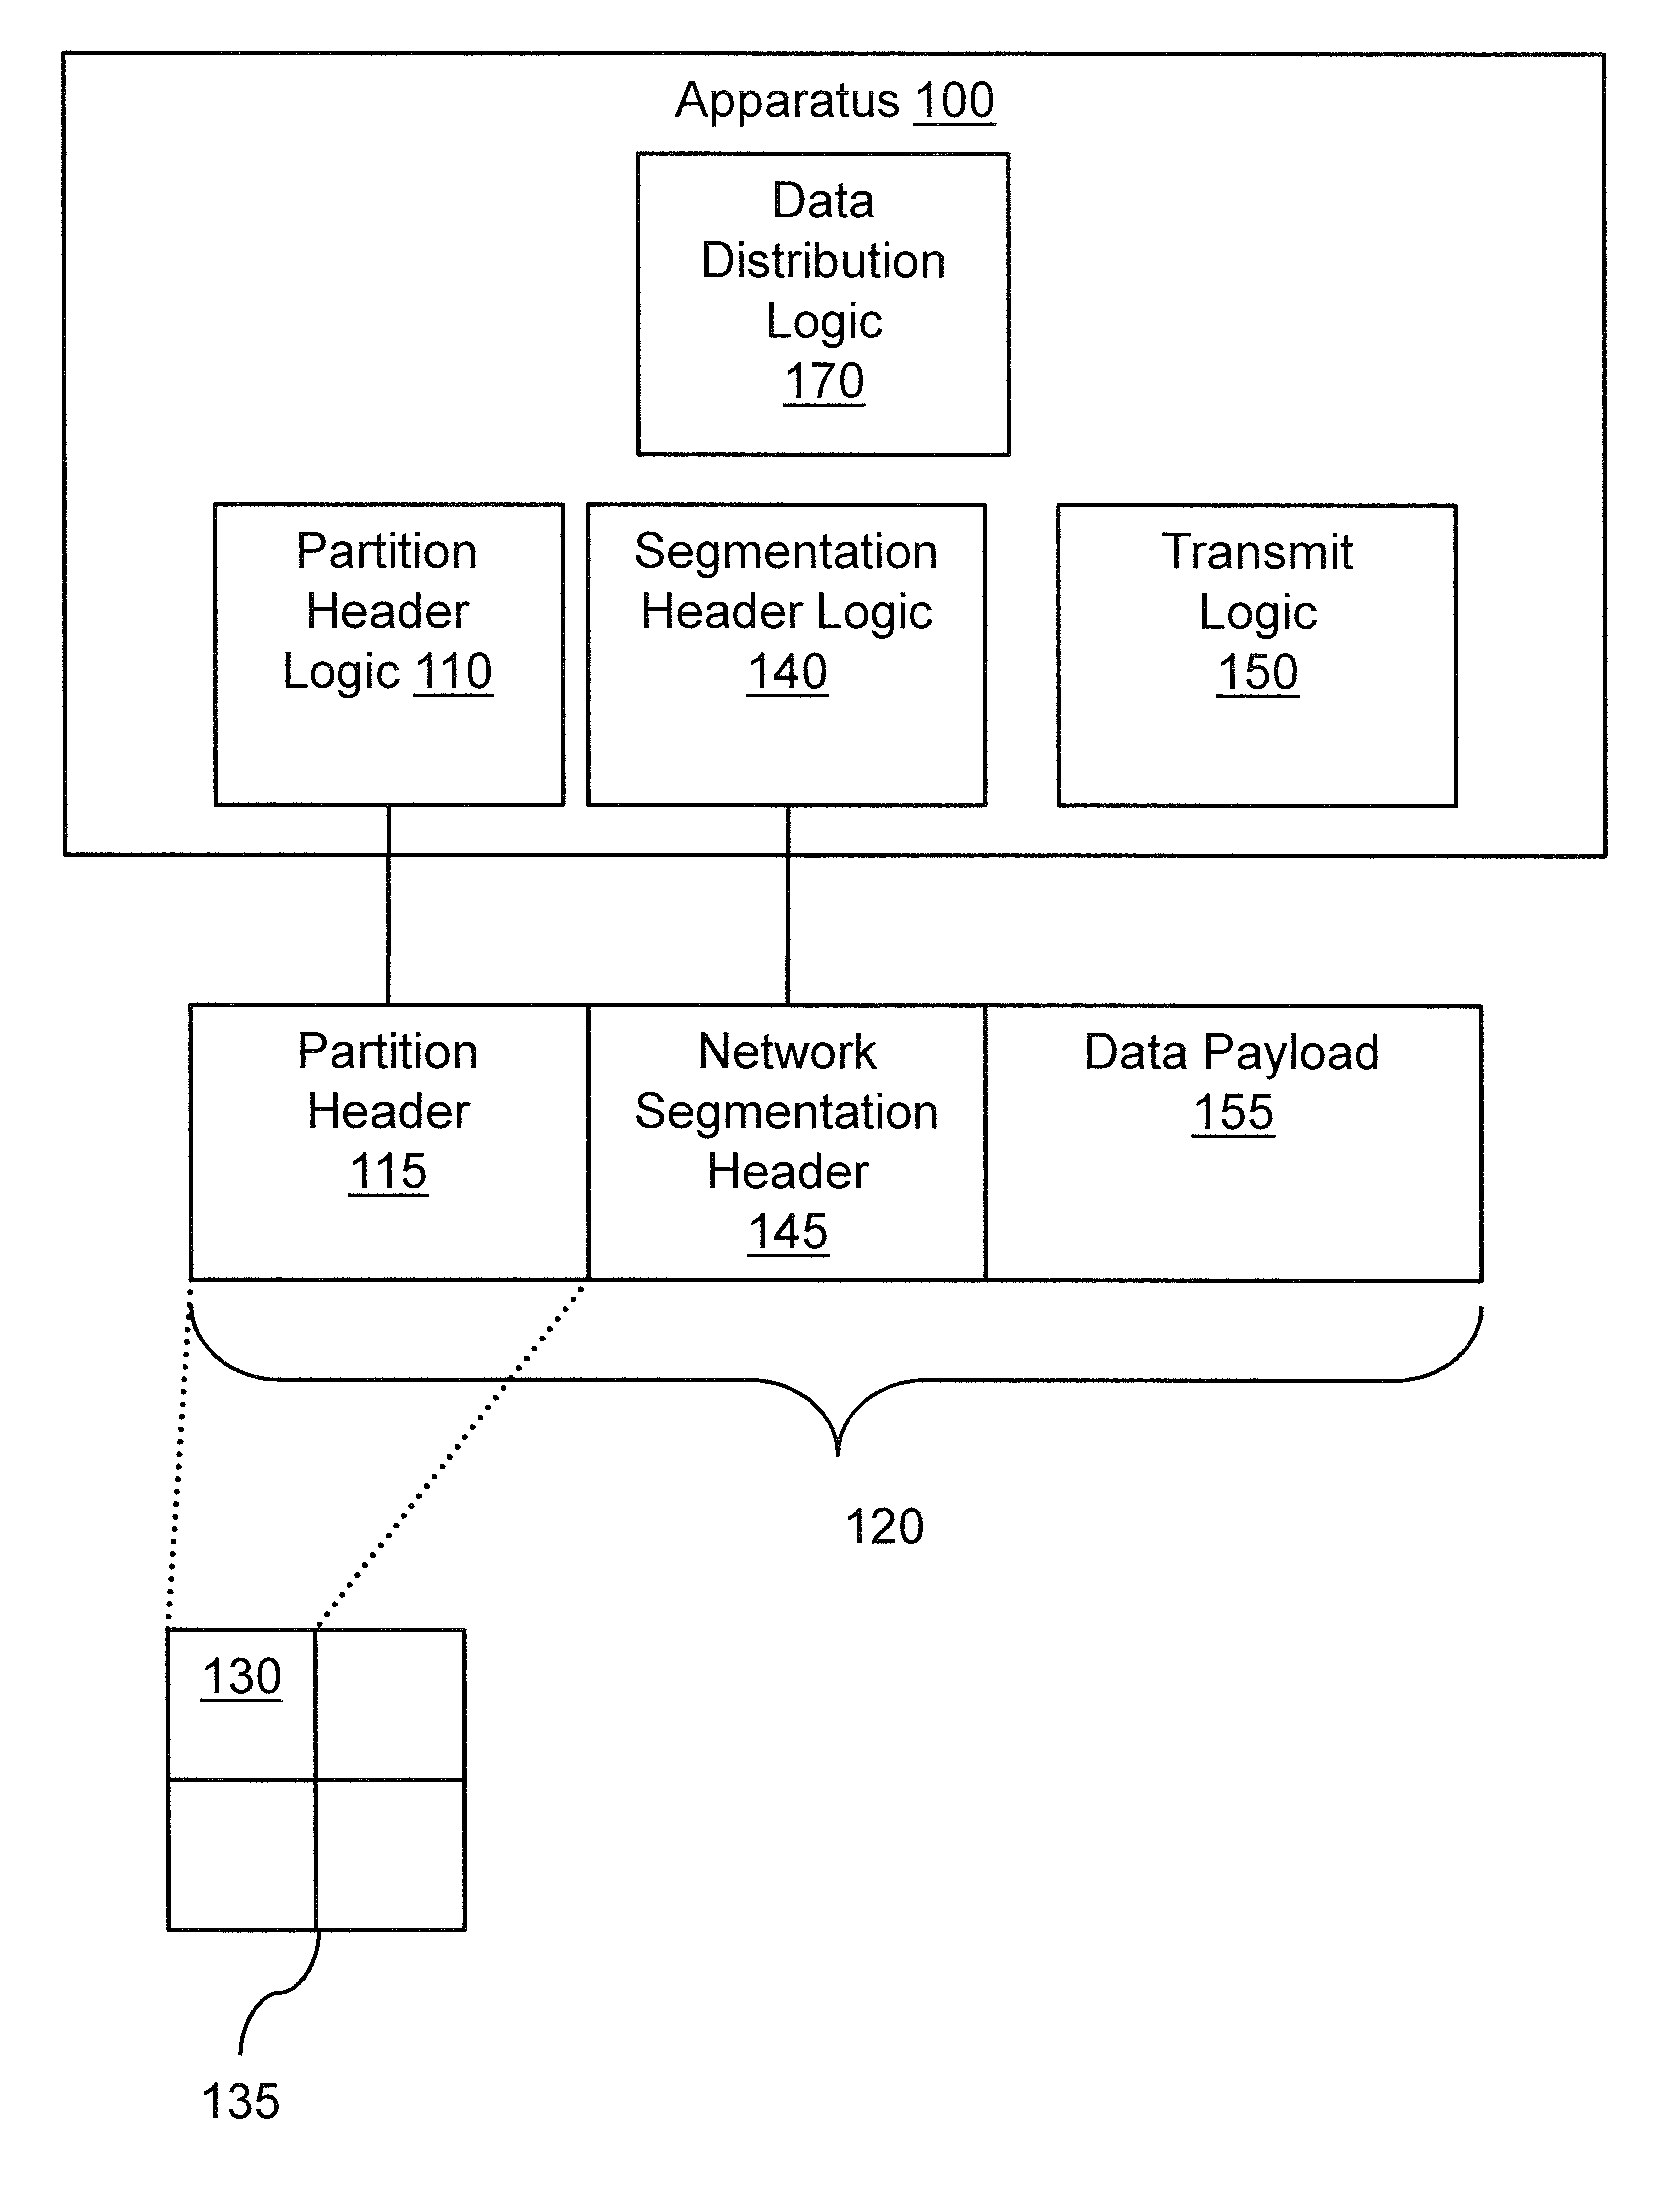 Logically partitioned networking devices